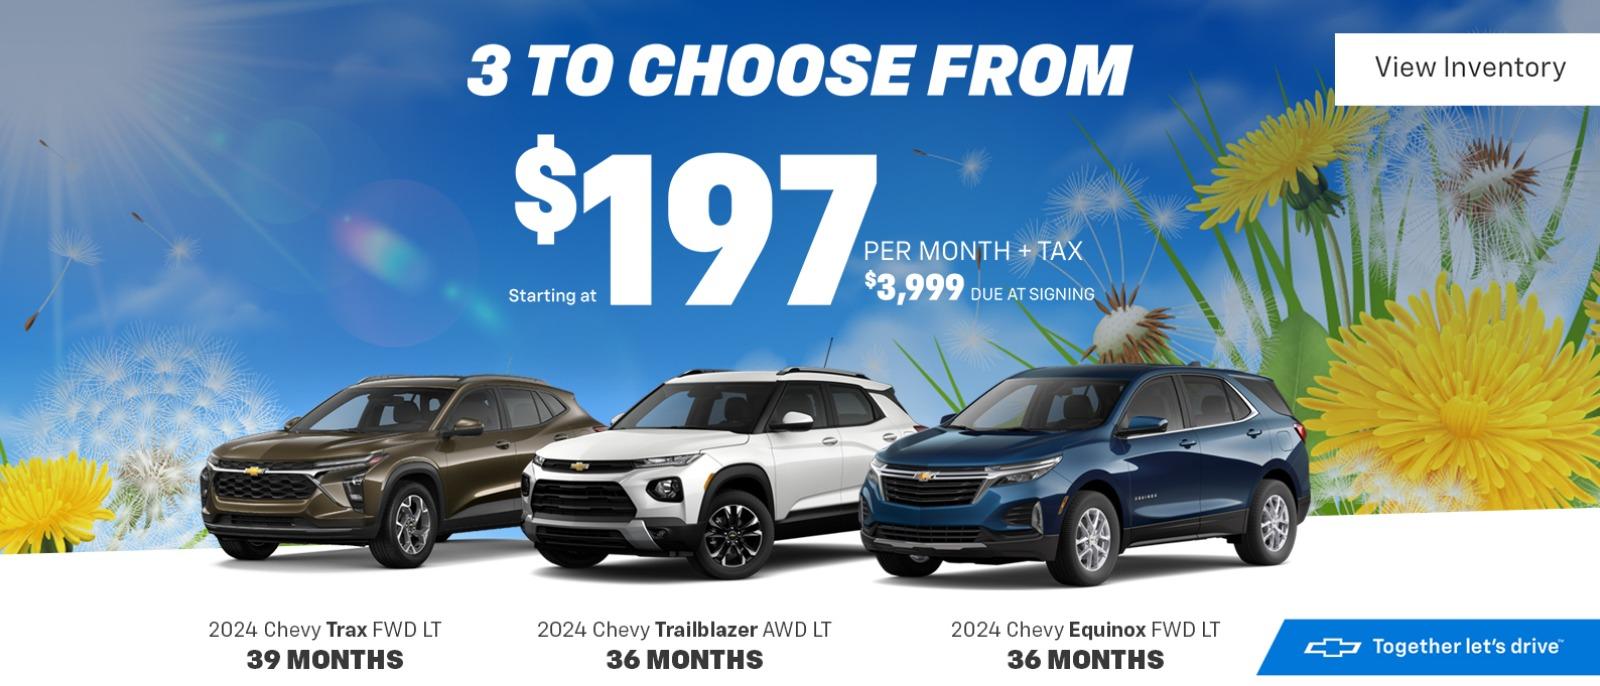 3 TO CHOOSE FROM $197 Starting at PER MONTH + TAX $3,999 DUE AT SIGNING